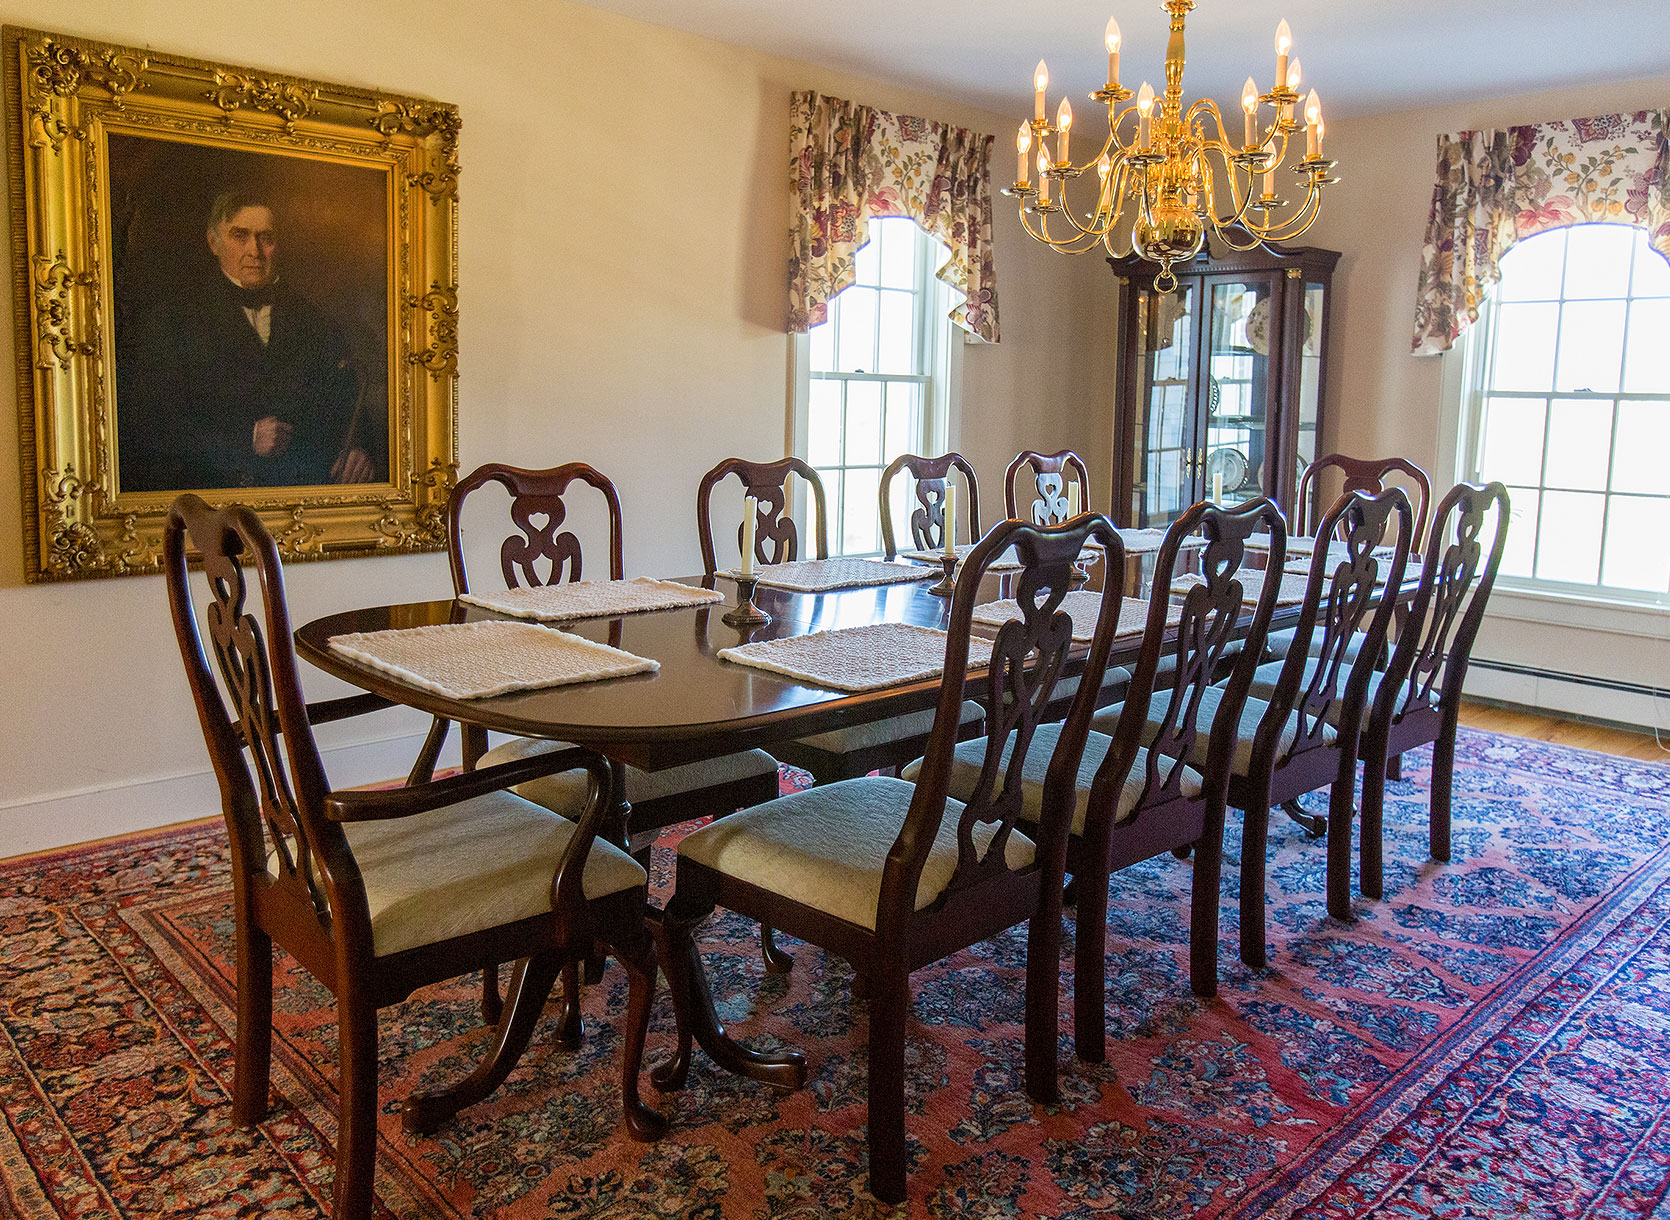 Guest house dining room